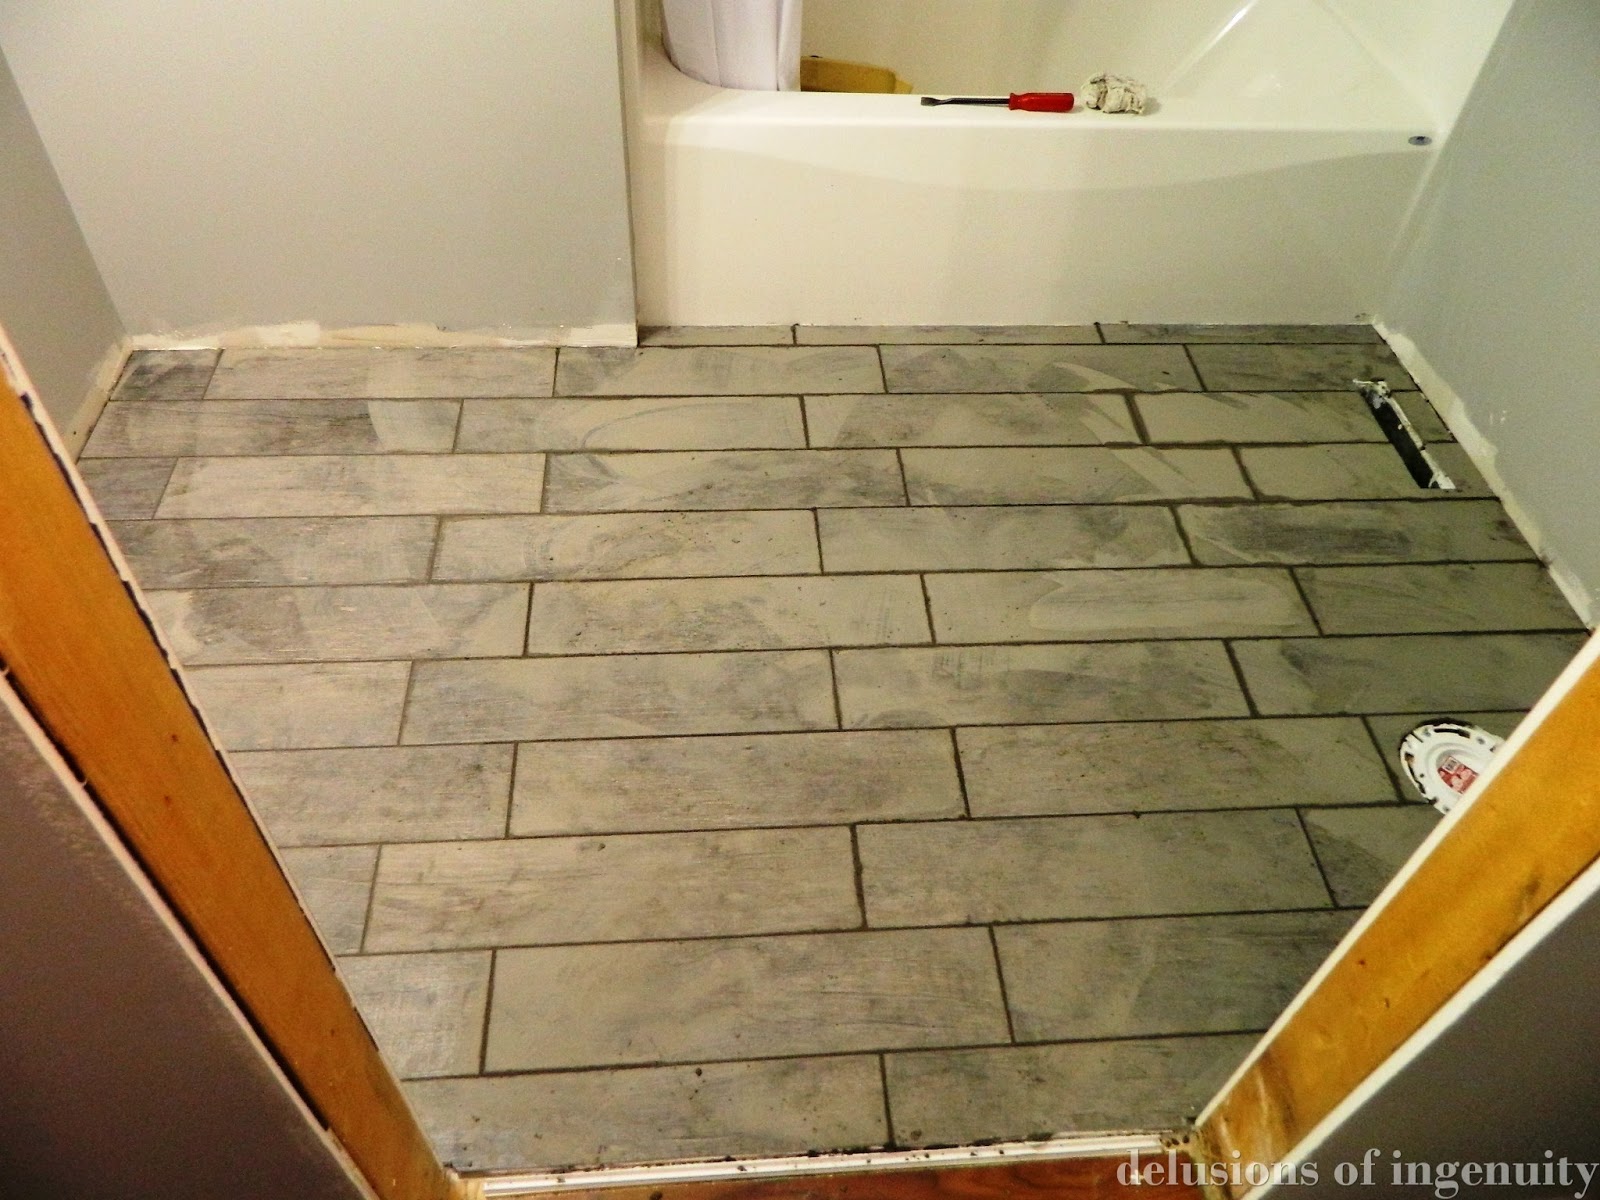 delusions of ingenuity: the tile of a bathroom floor